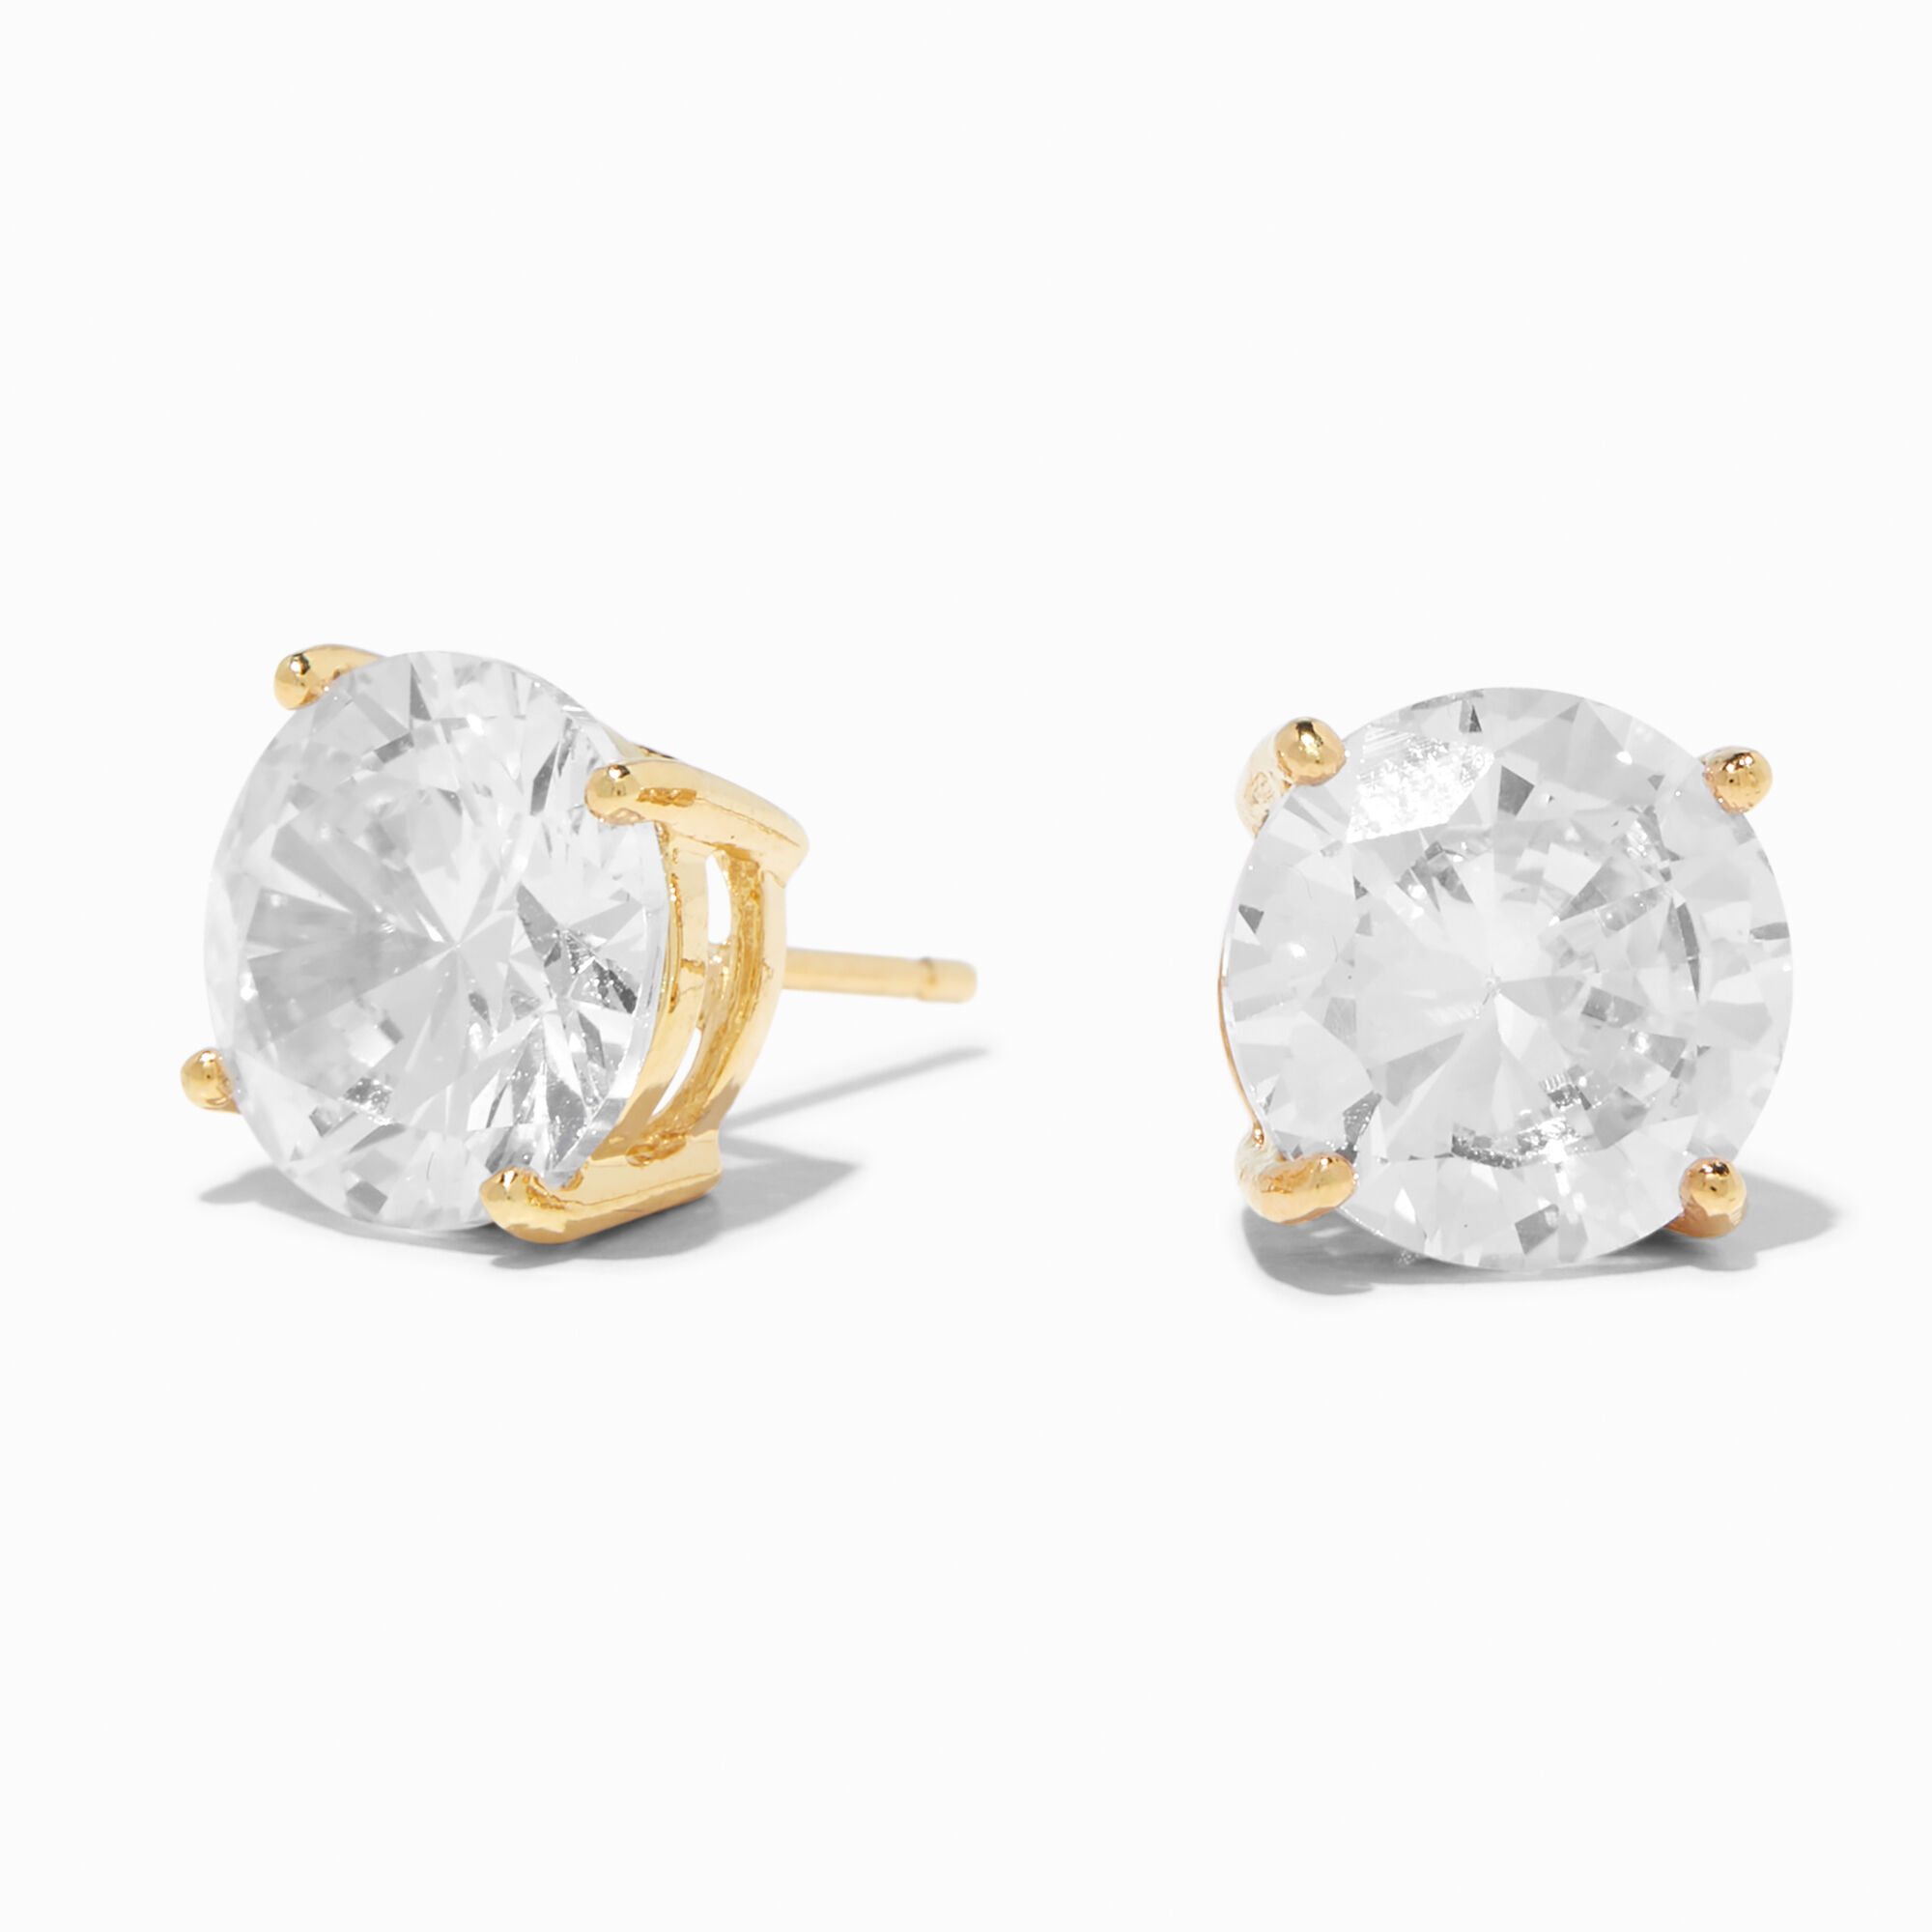 View Claires 18K Plated Cubic Zirconia 10MM Round Stud Earrings Gold information